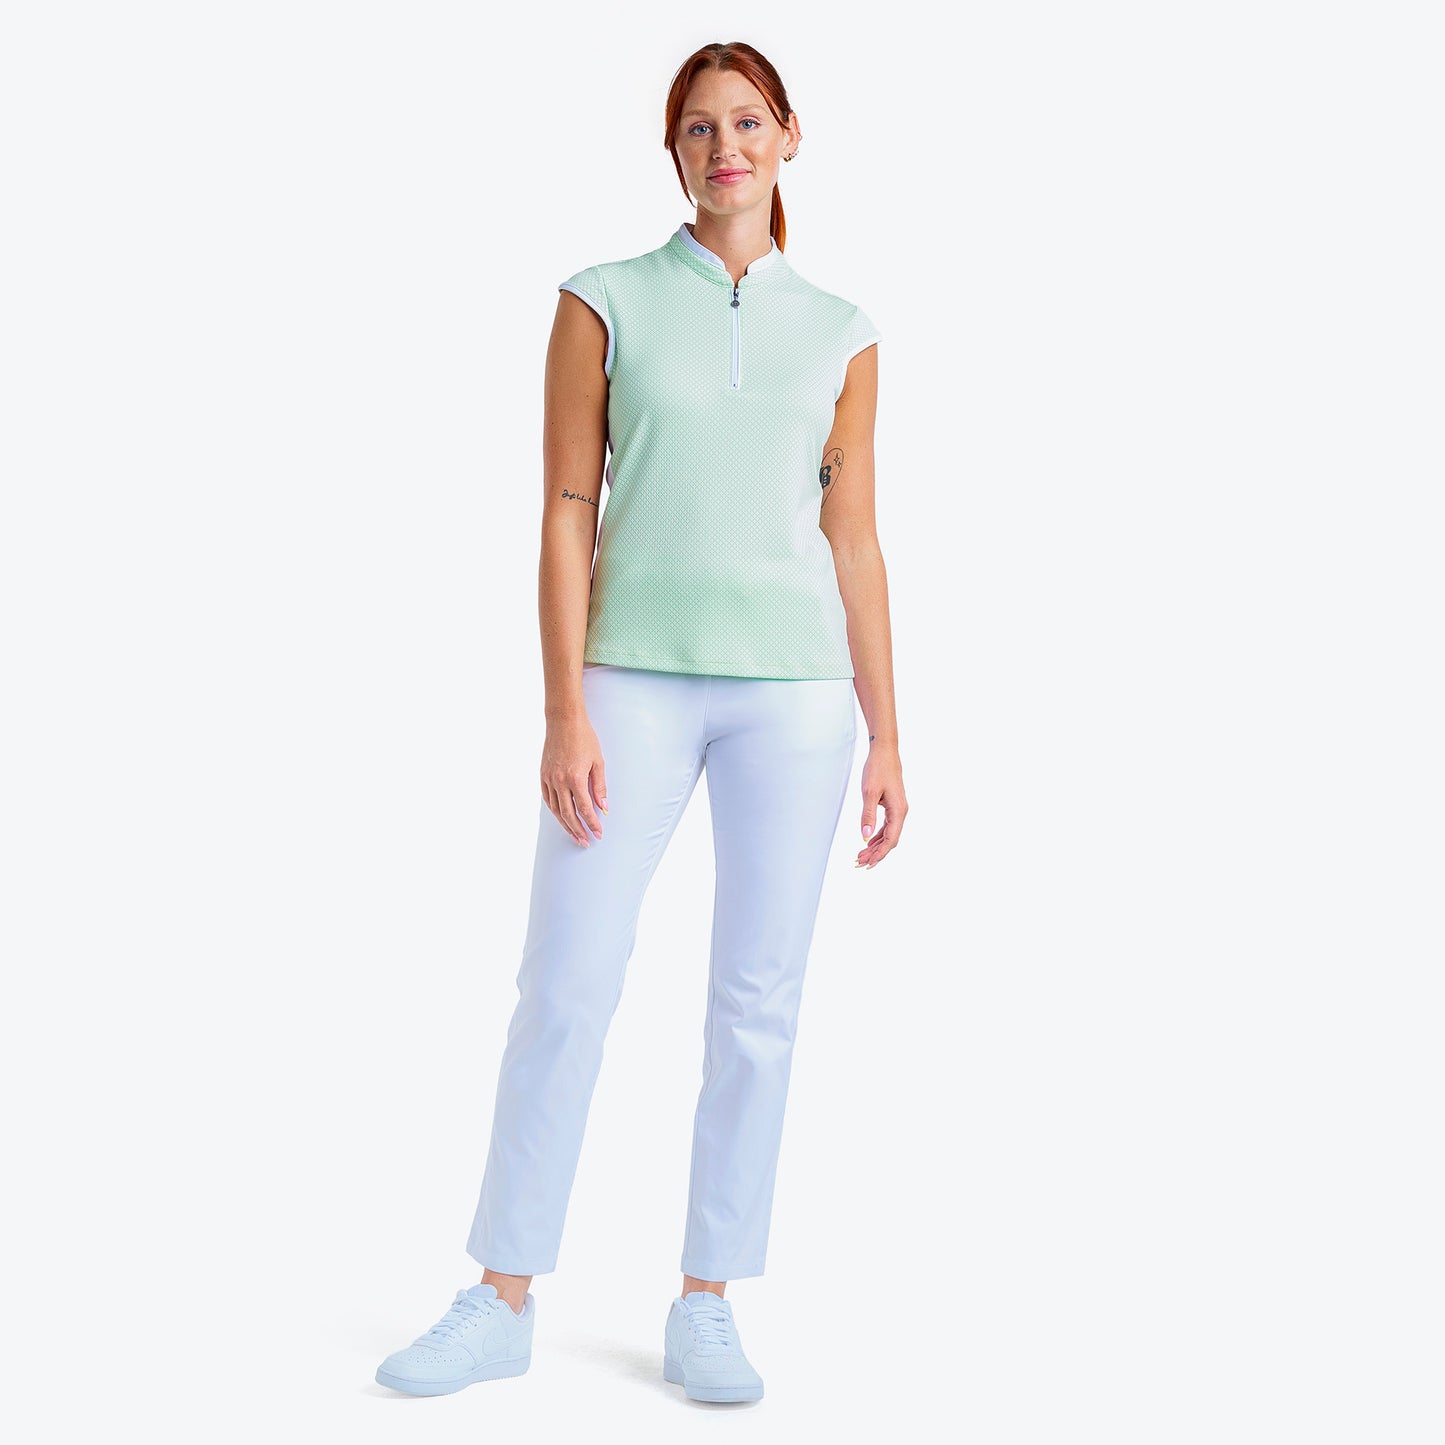 Nivo Ladies Sleeveless Polo in Fresh Mint with Cross Stitch Pattern